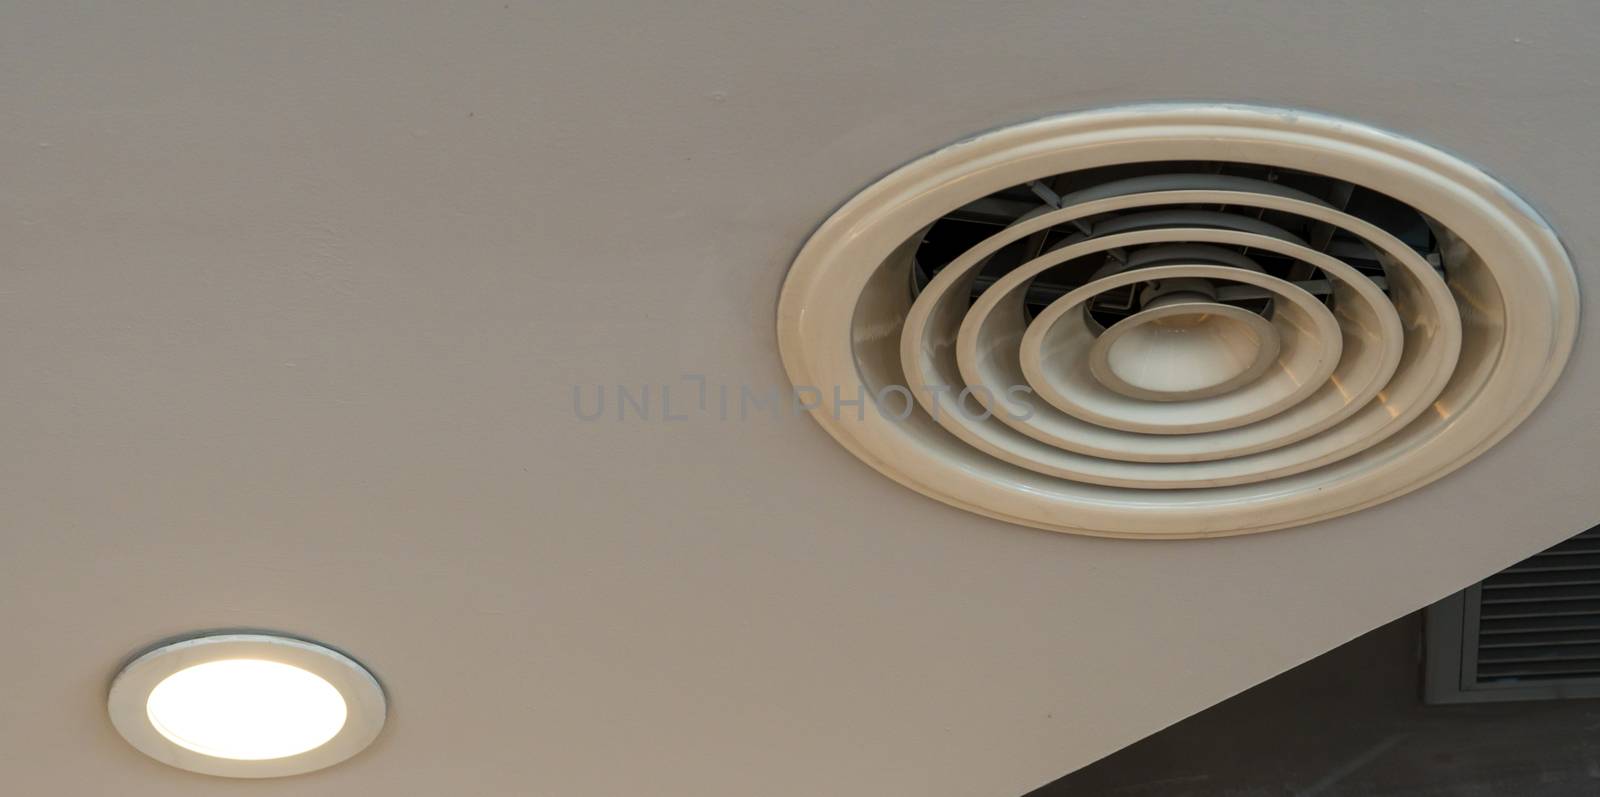 Air duct on ceiling in the mall or hospital. Air conditioner ins by Fahroni